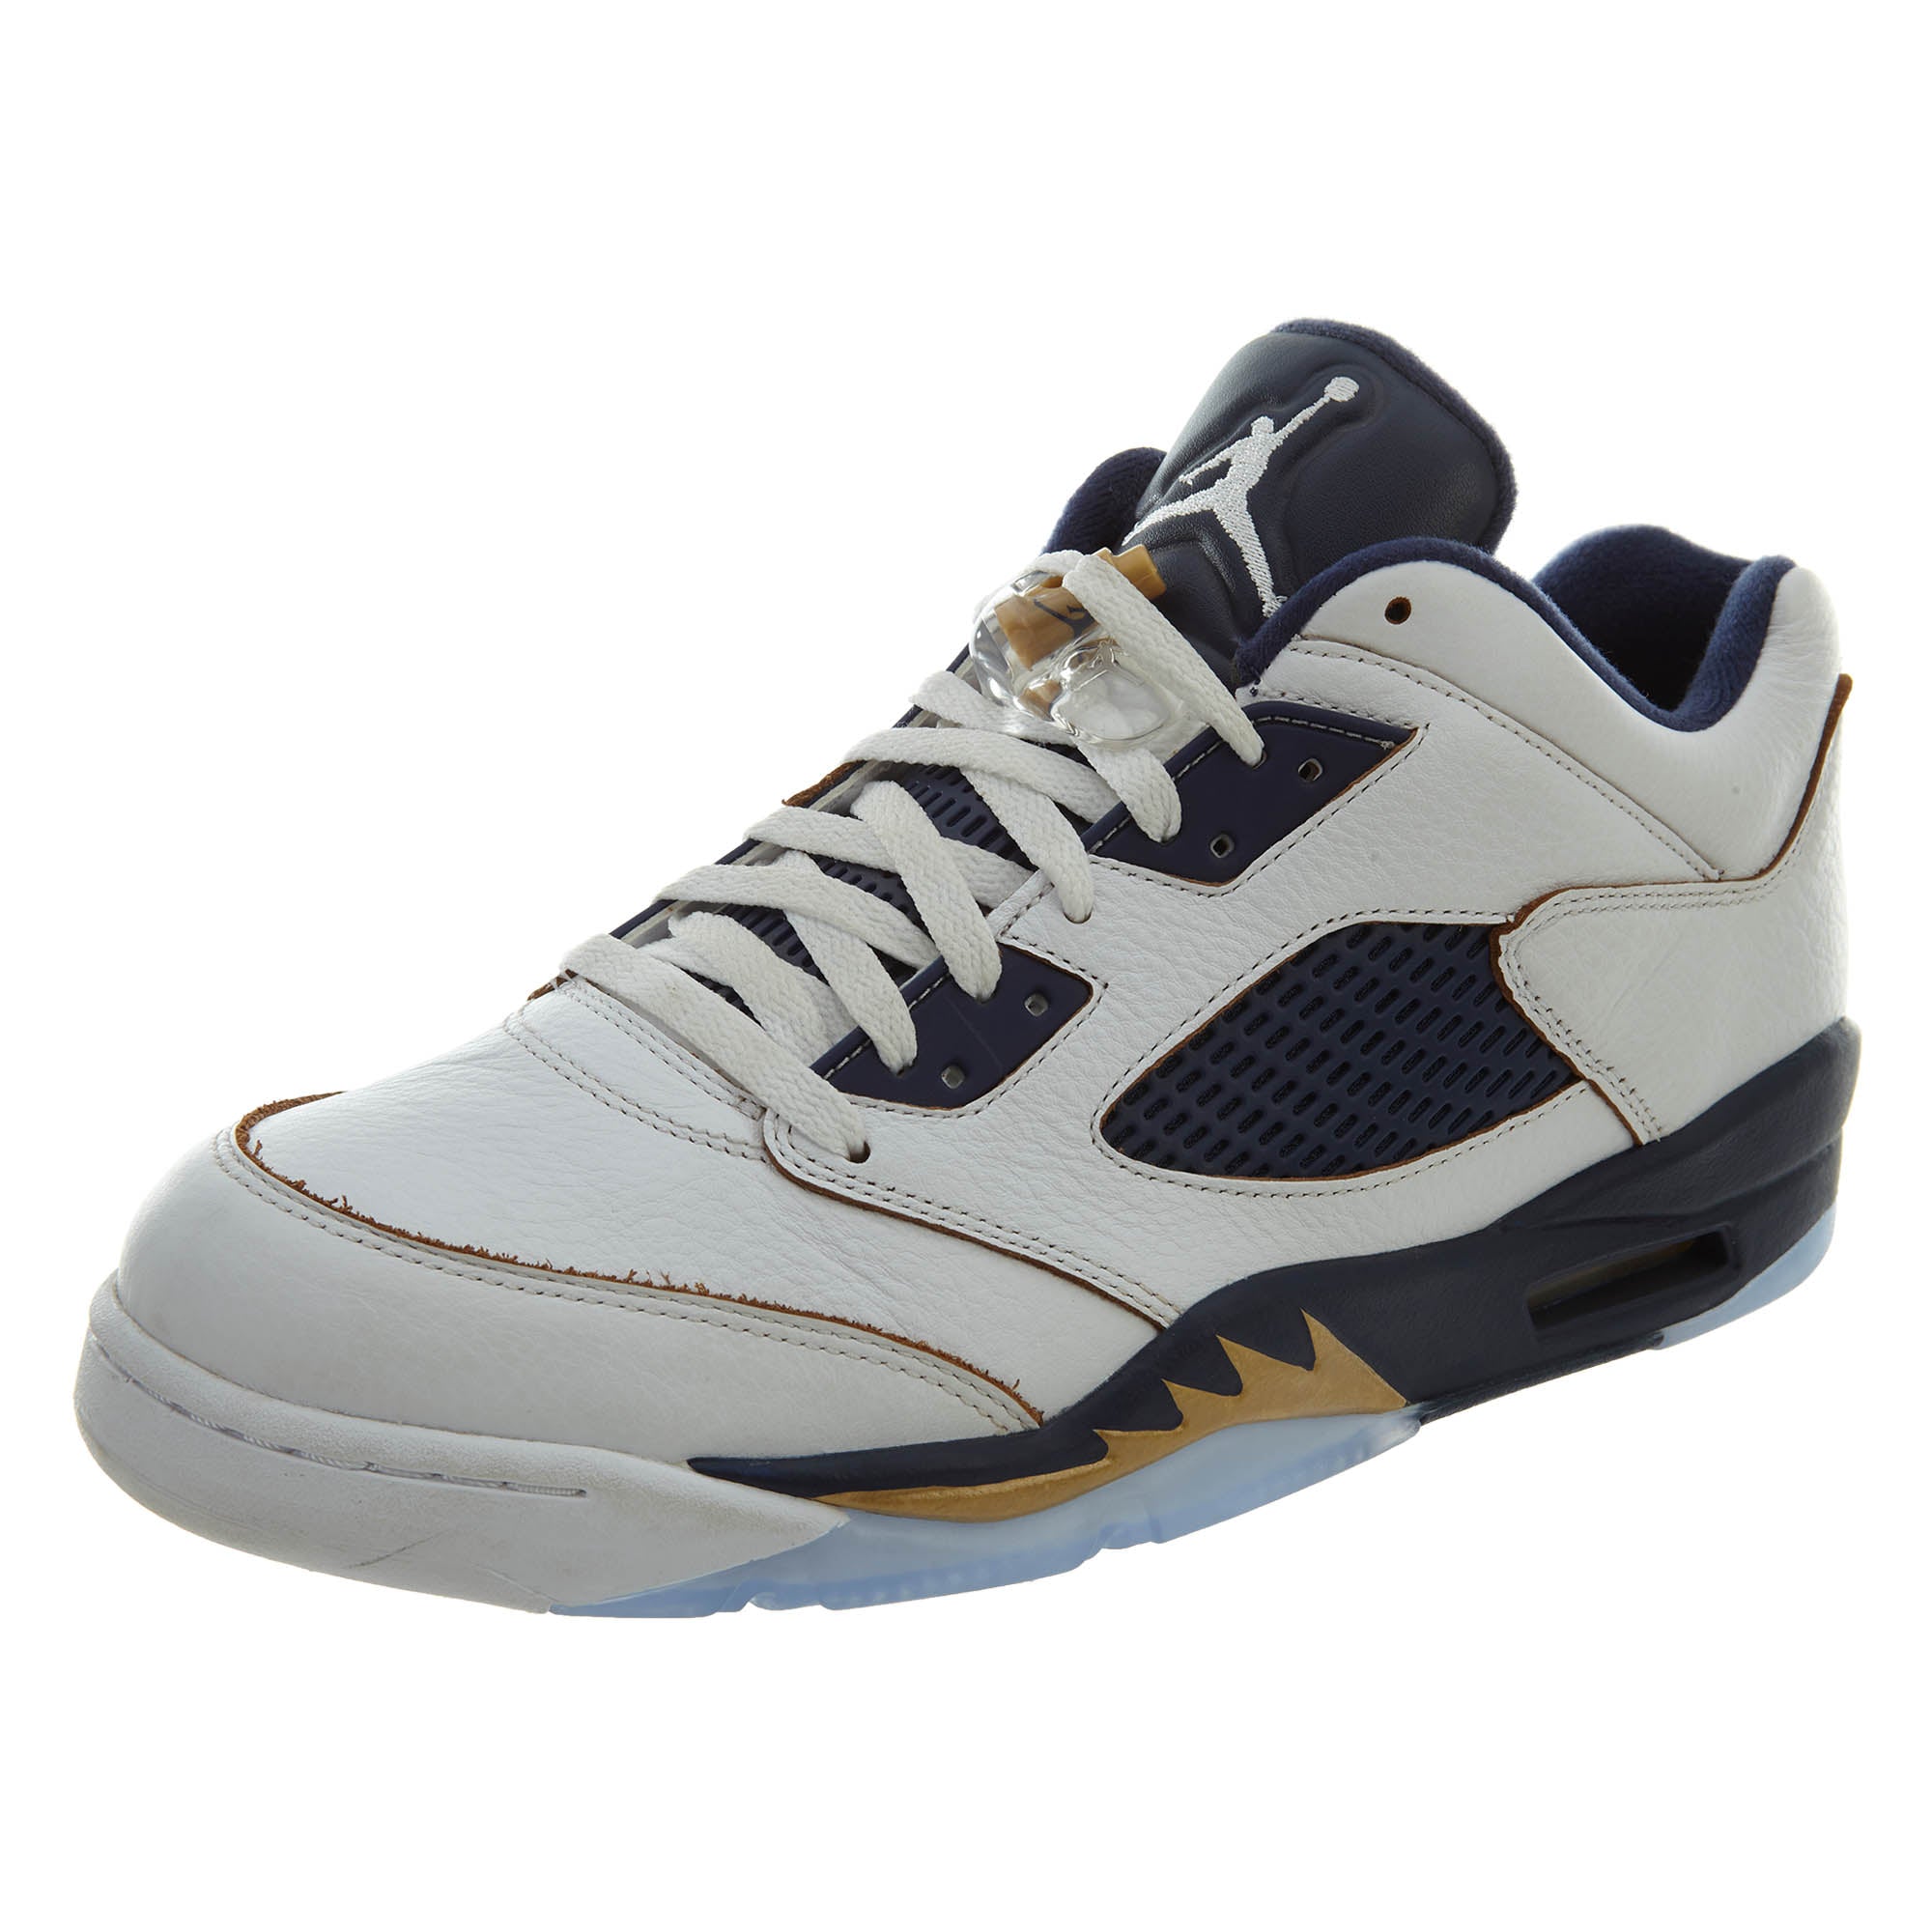 Jordan 5 Retro Low Dunk From Above Basketball Shoes